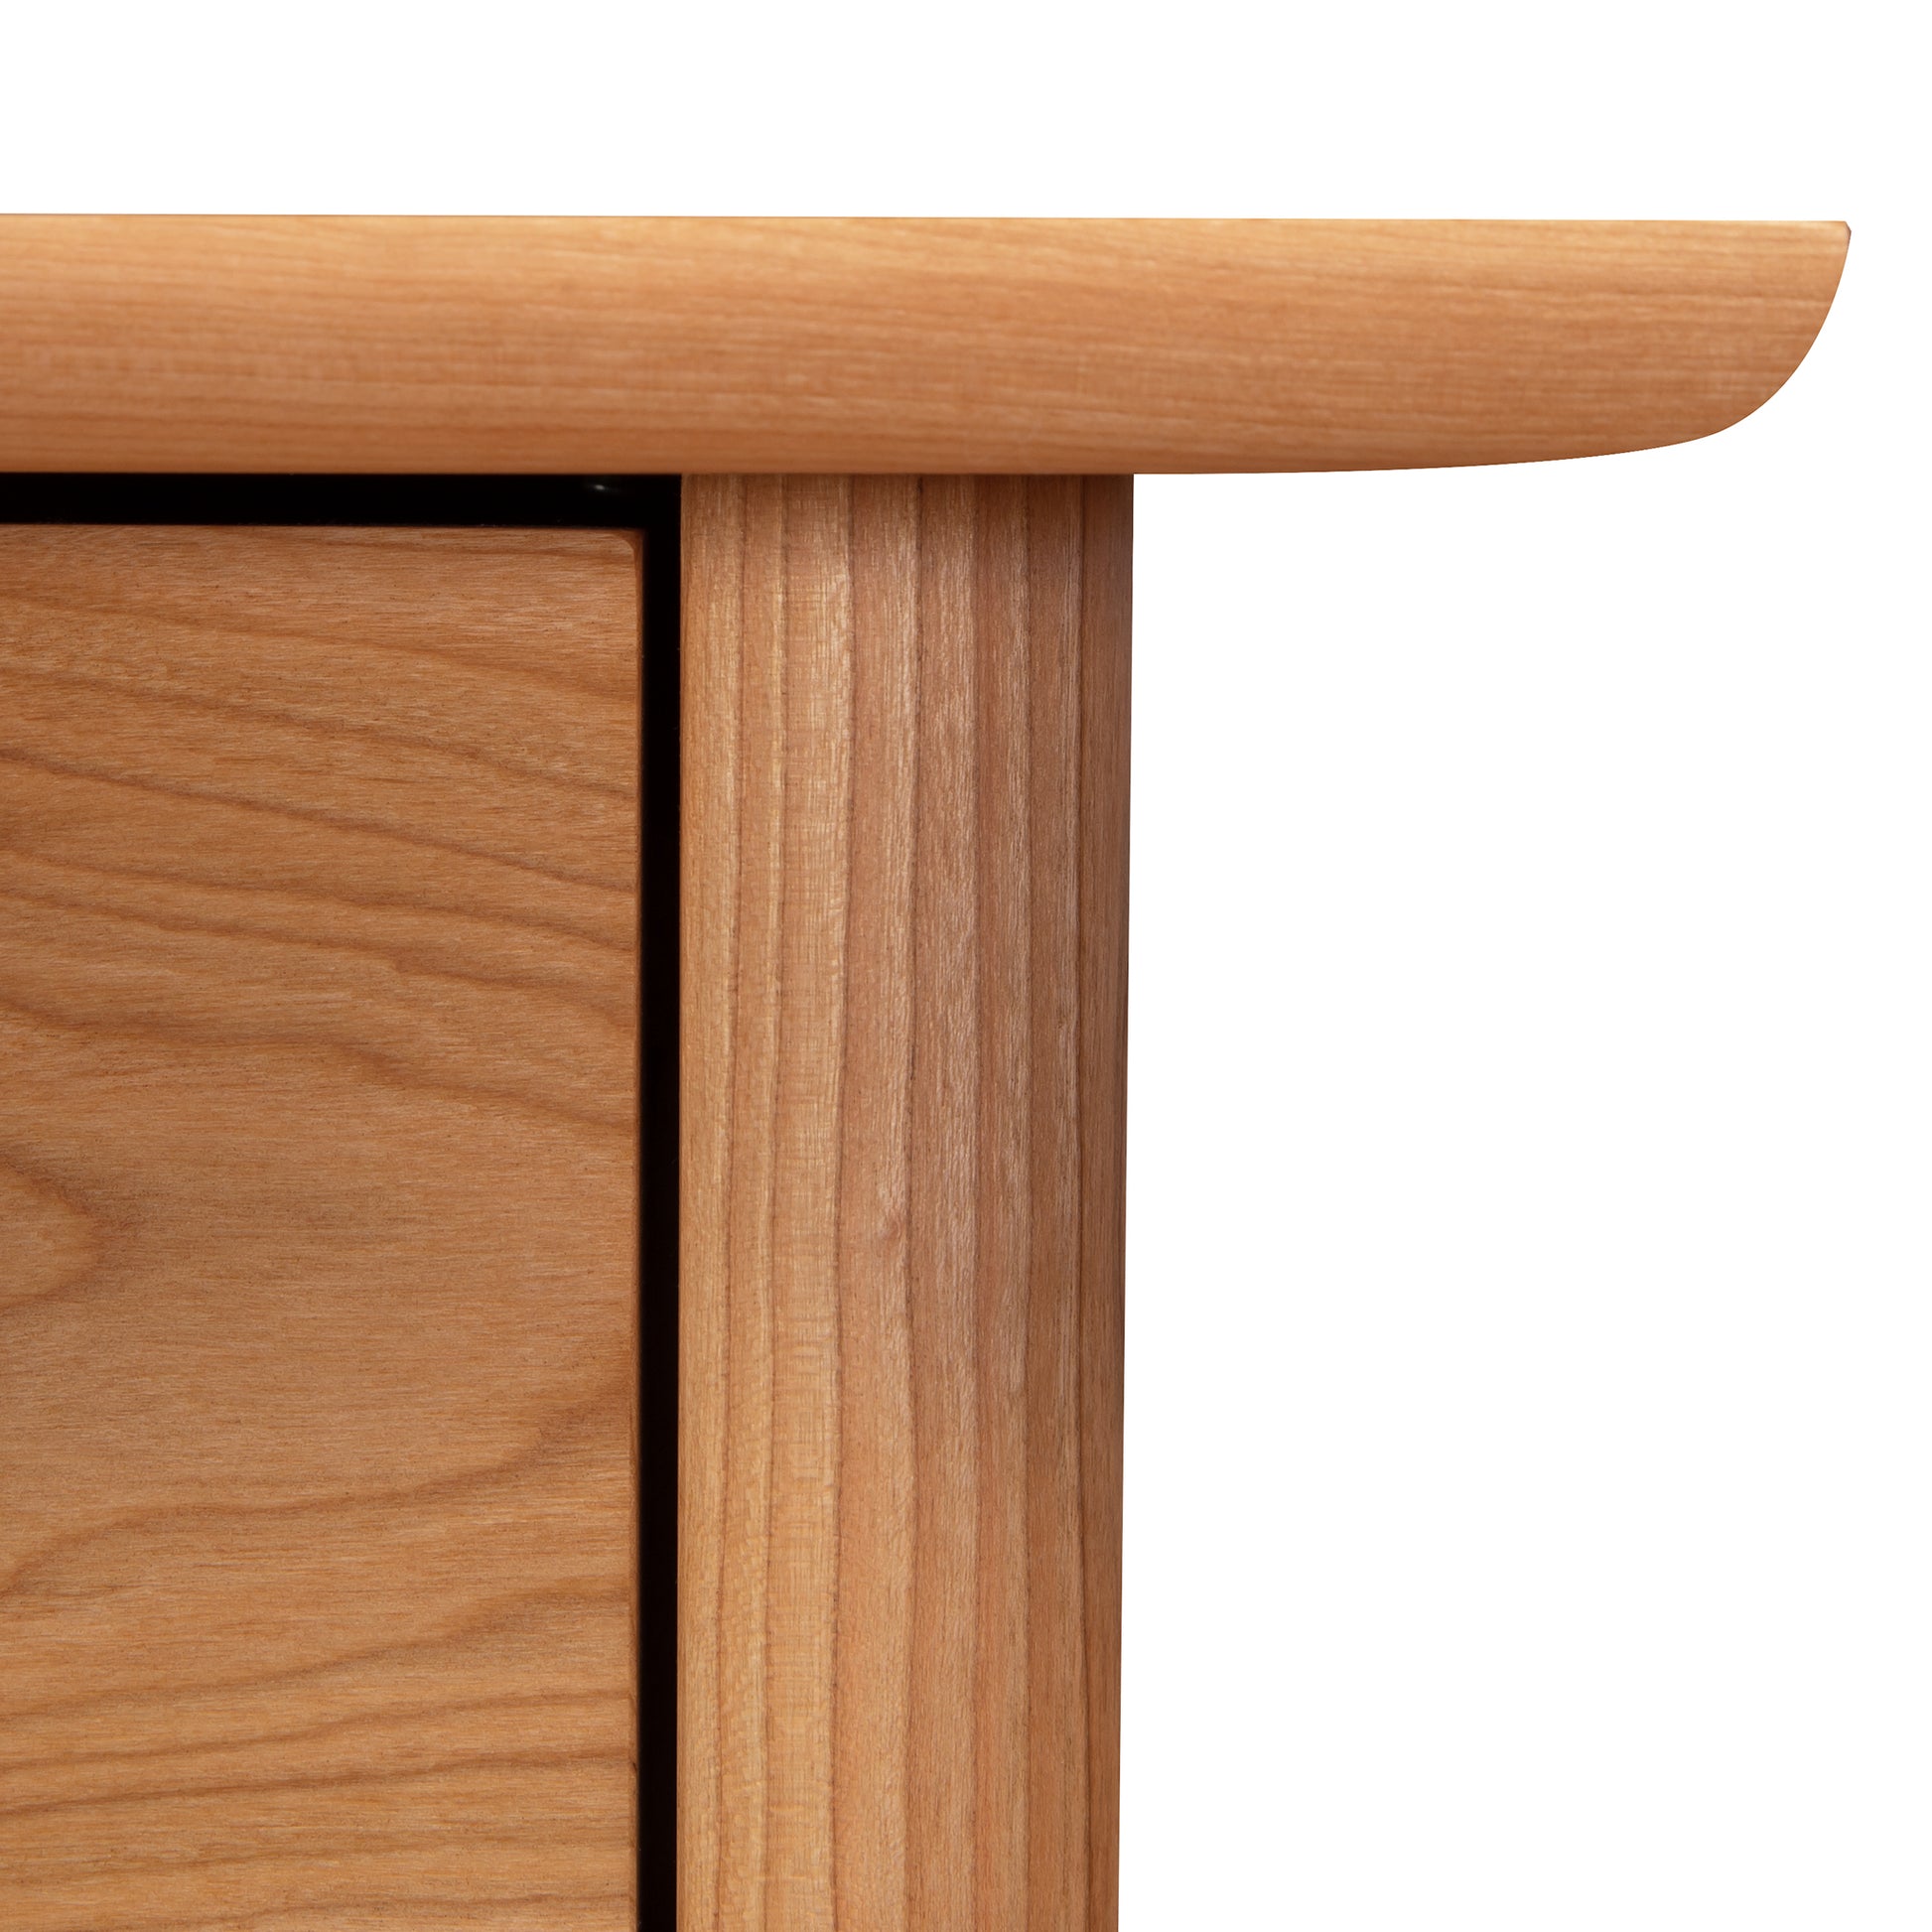 A close up view of the Heartwood Shaker Vertical File Cabinet by Vermont Furniture Designs in a modern office setting.